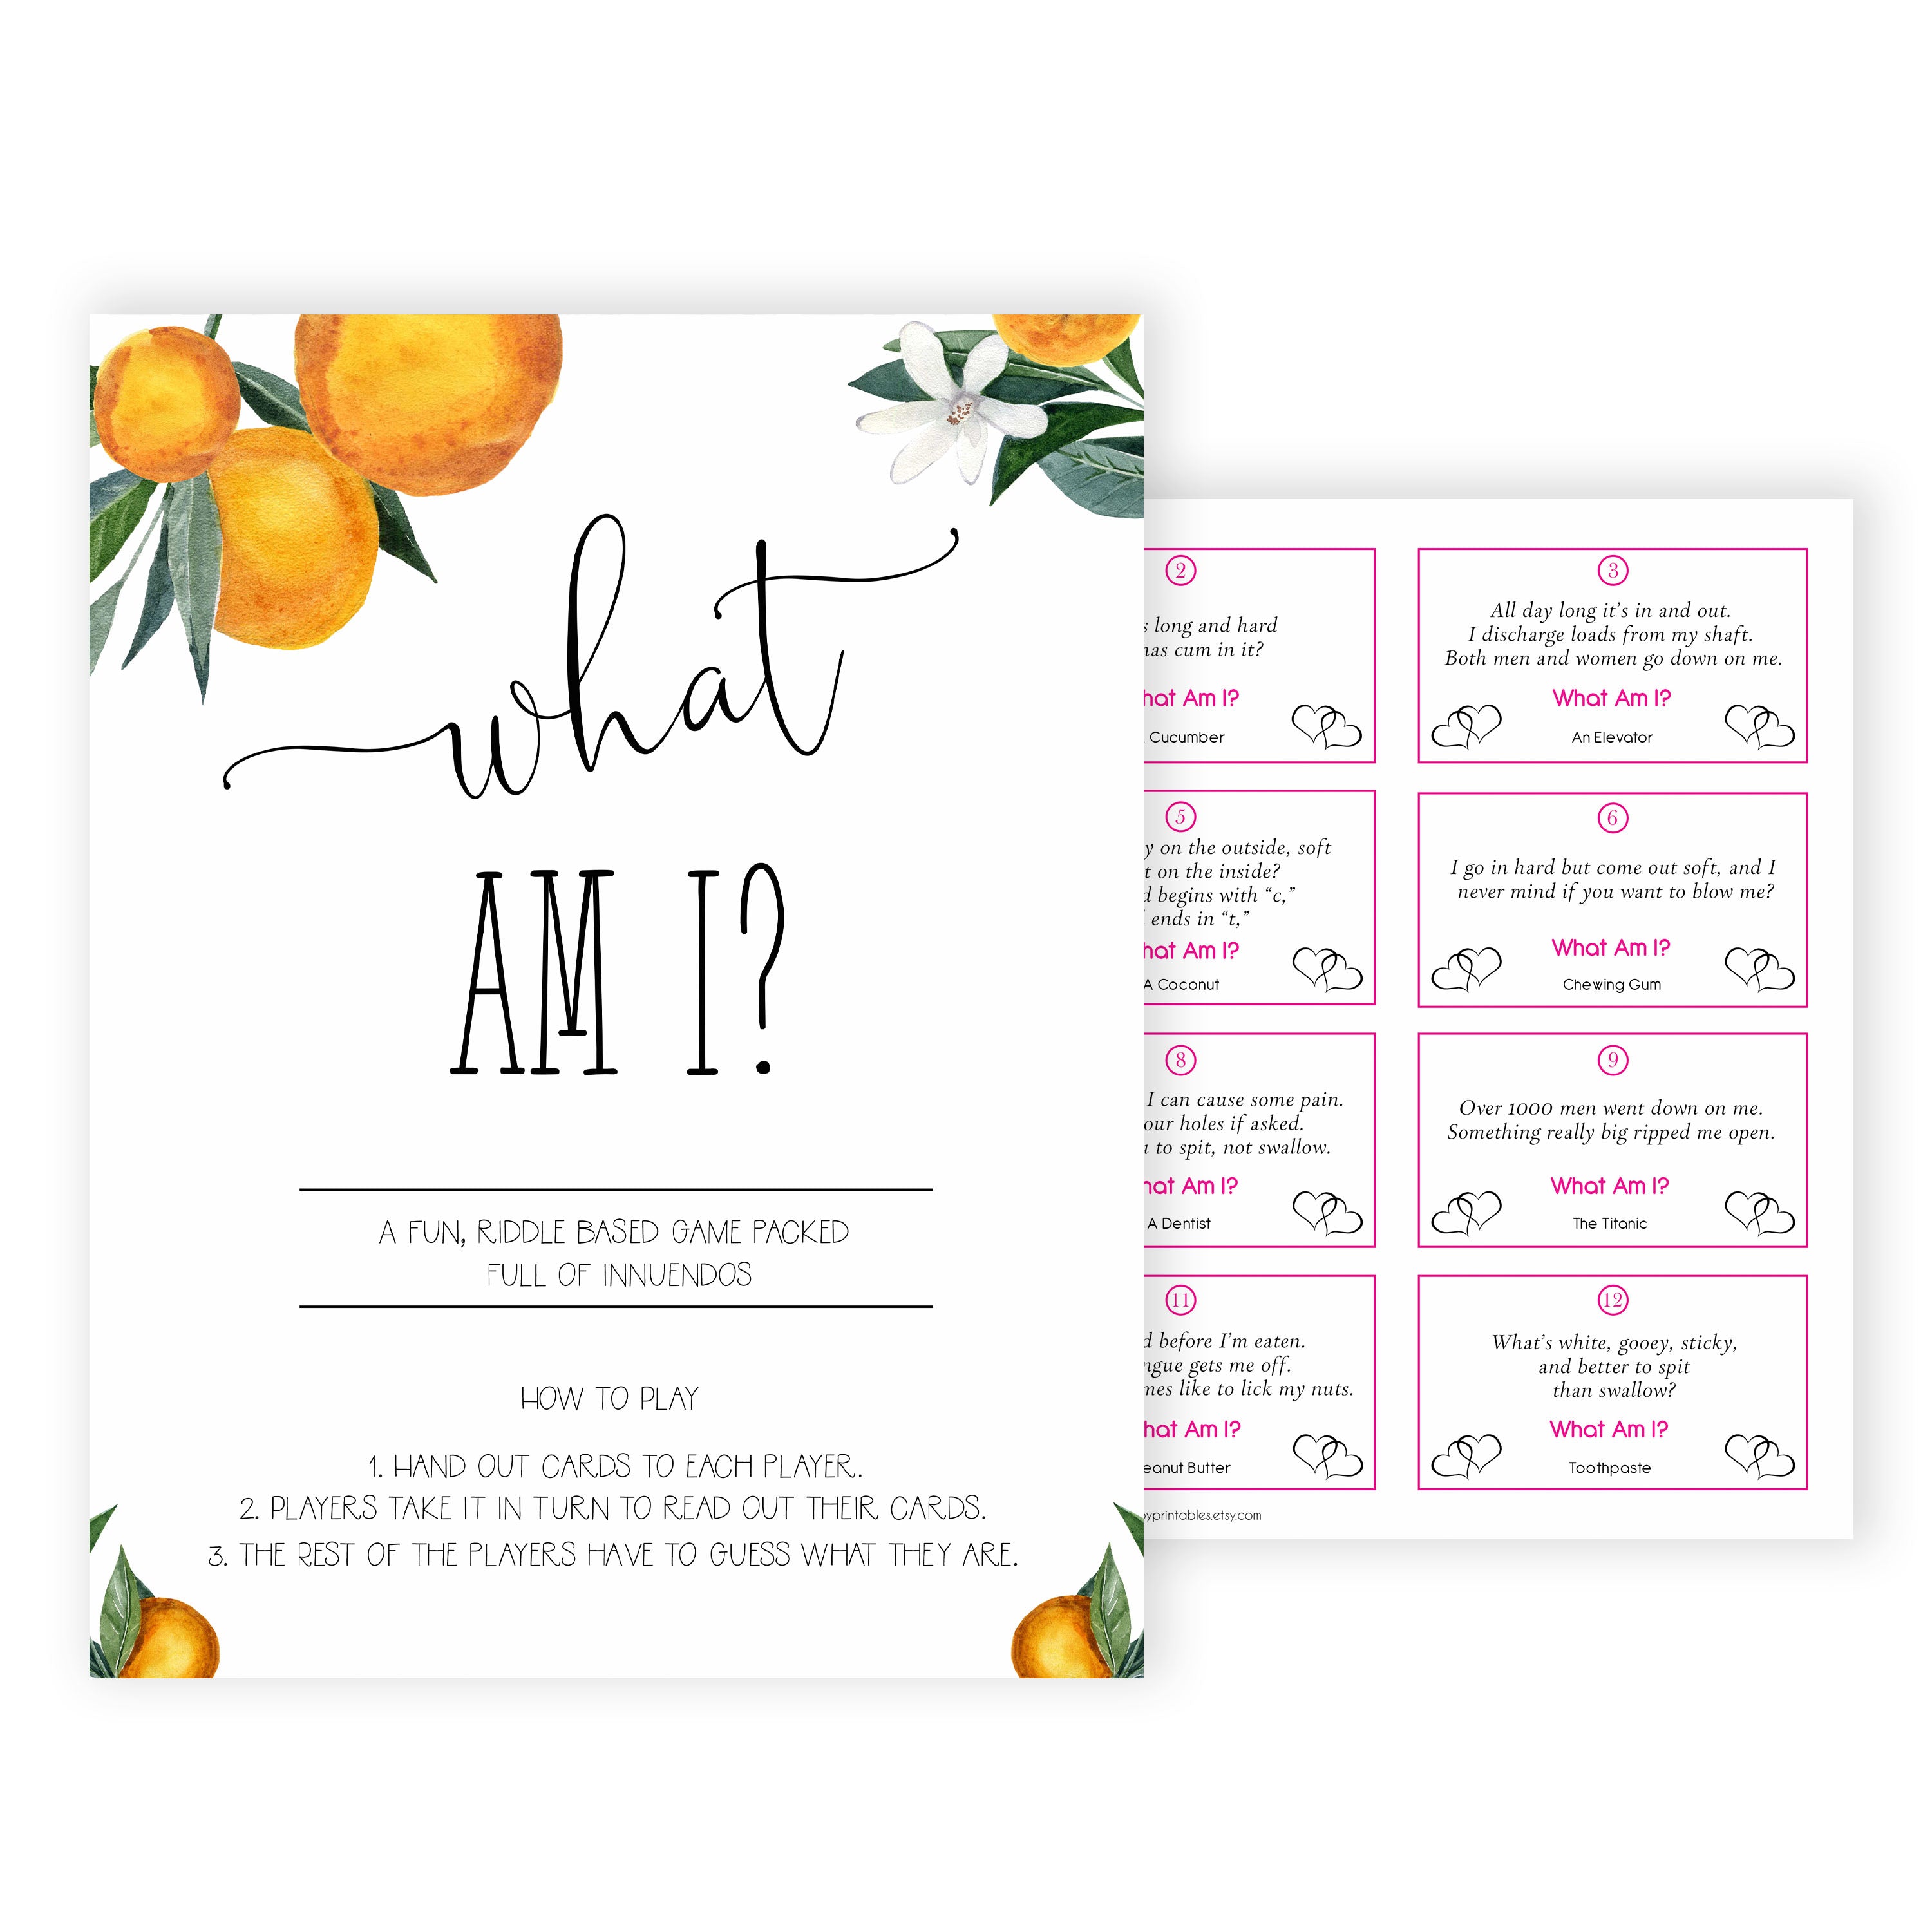 what am I baby shower game, Printable baby shower games, little cutie baby games, baby shower games, fun baby shower ideas, top baby shower ideas, little cutie baby shower, baby shower games, fun little cutie baby shower ideas, citrus baby shower games, citrus baby shower, orange baby shower